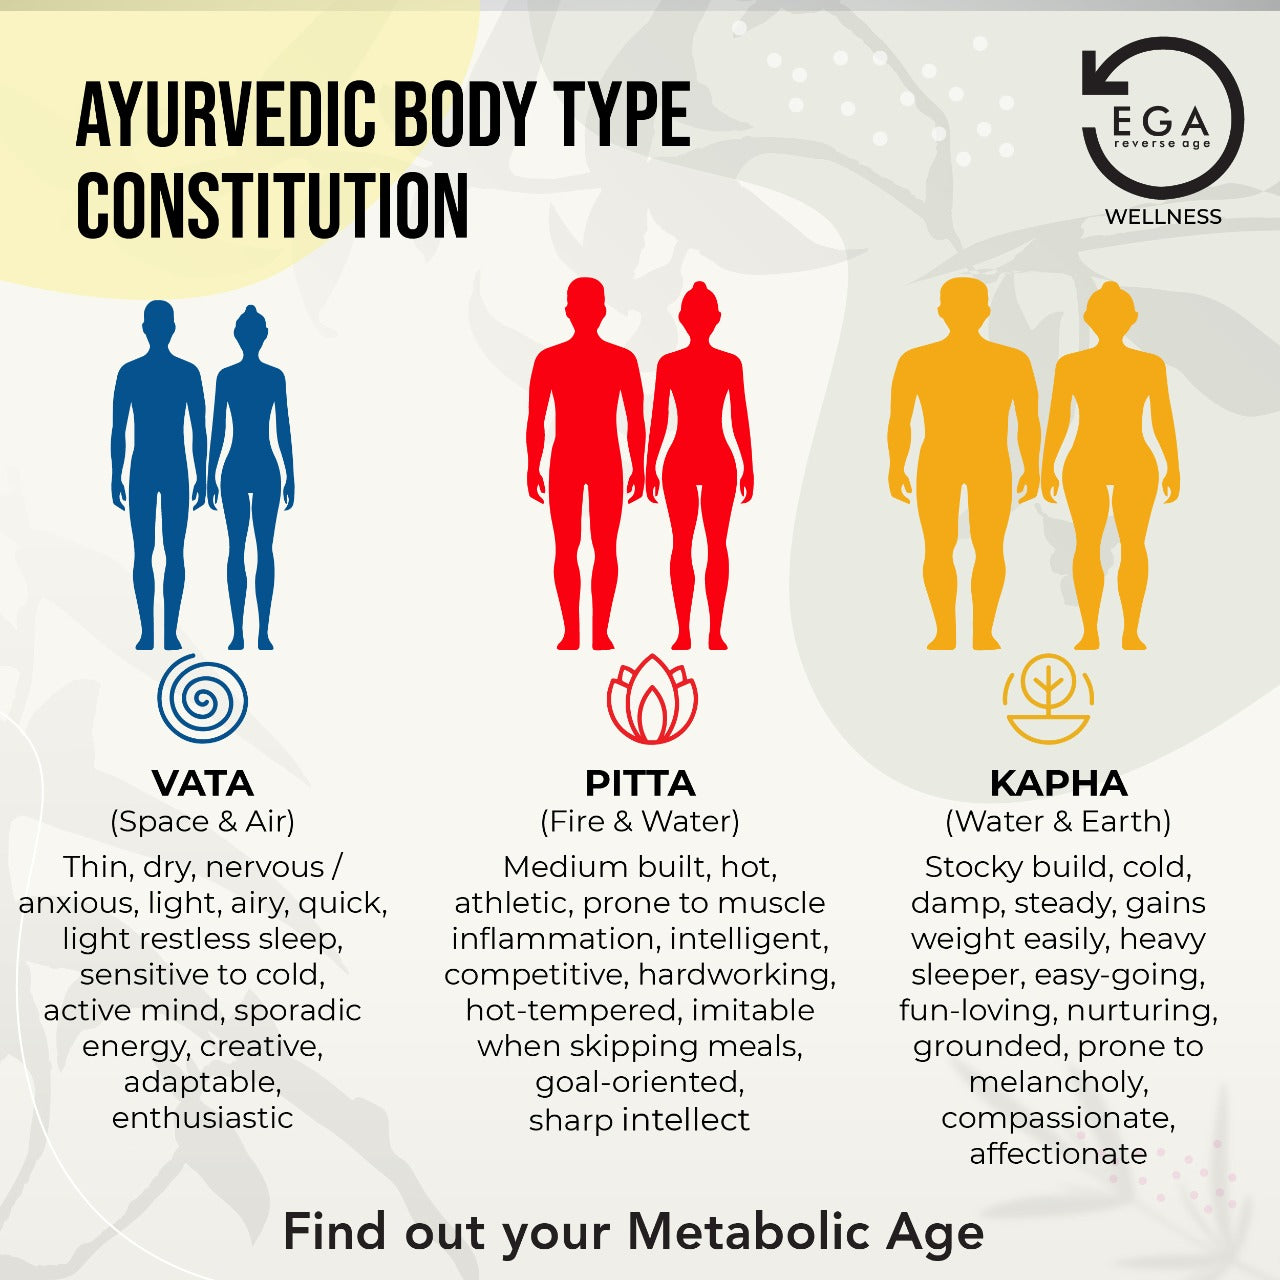 Online Consultation with Ayurveda Doctor for with Diet and Lifestyle plan as per Body Type